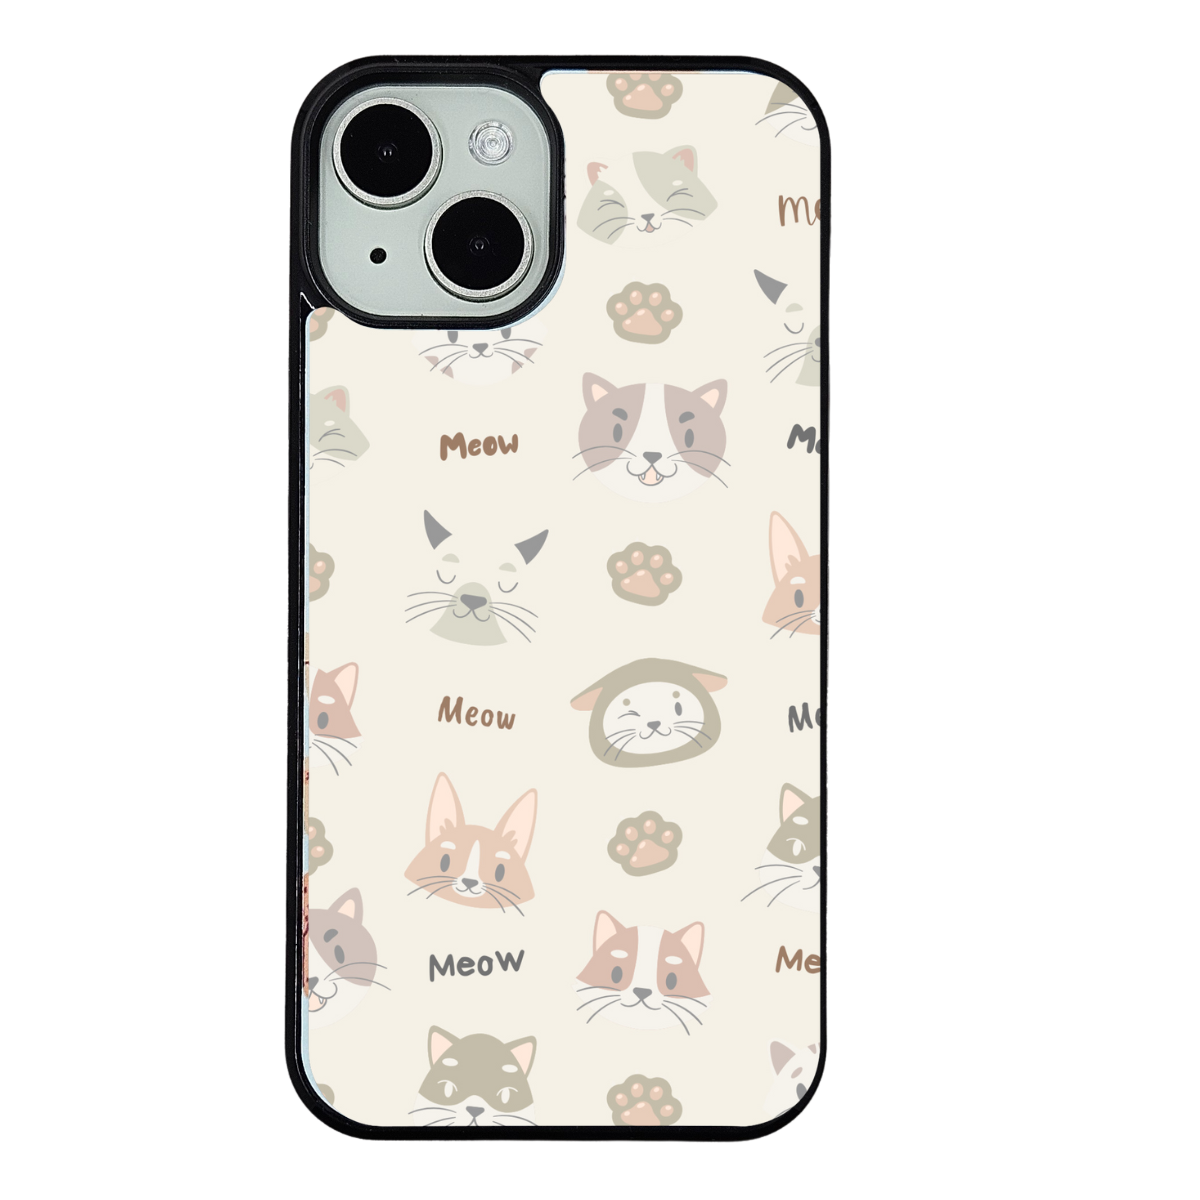 The Cats Meow Phone Case